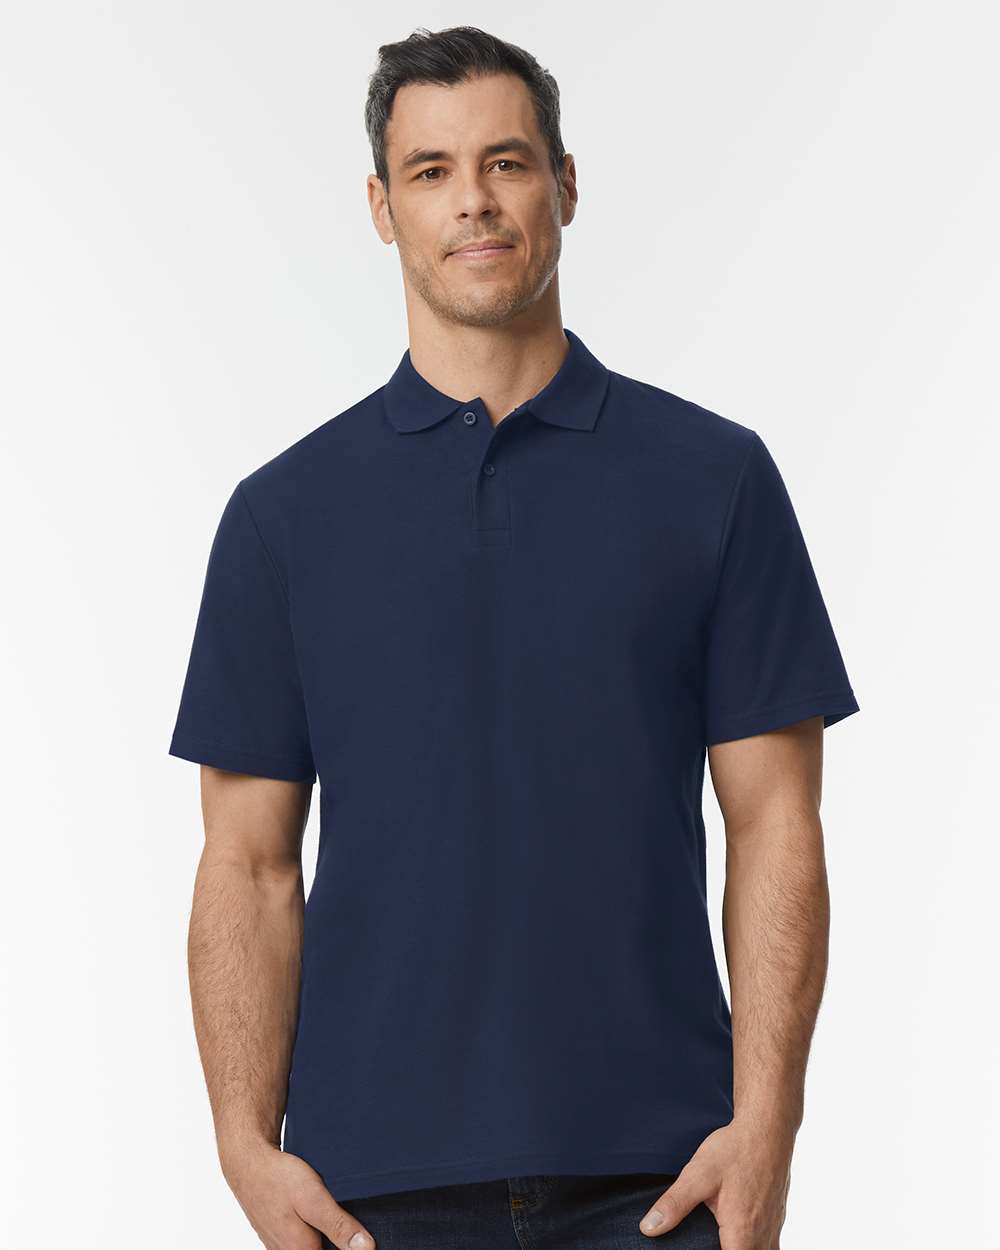 Gildan Softstyle® Adult Pique Polo 64800 #colormdl_Navy